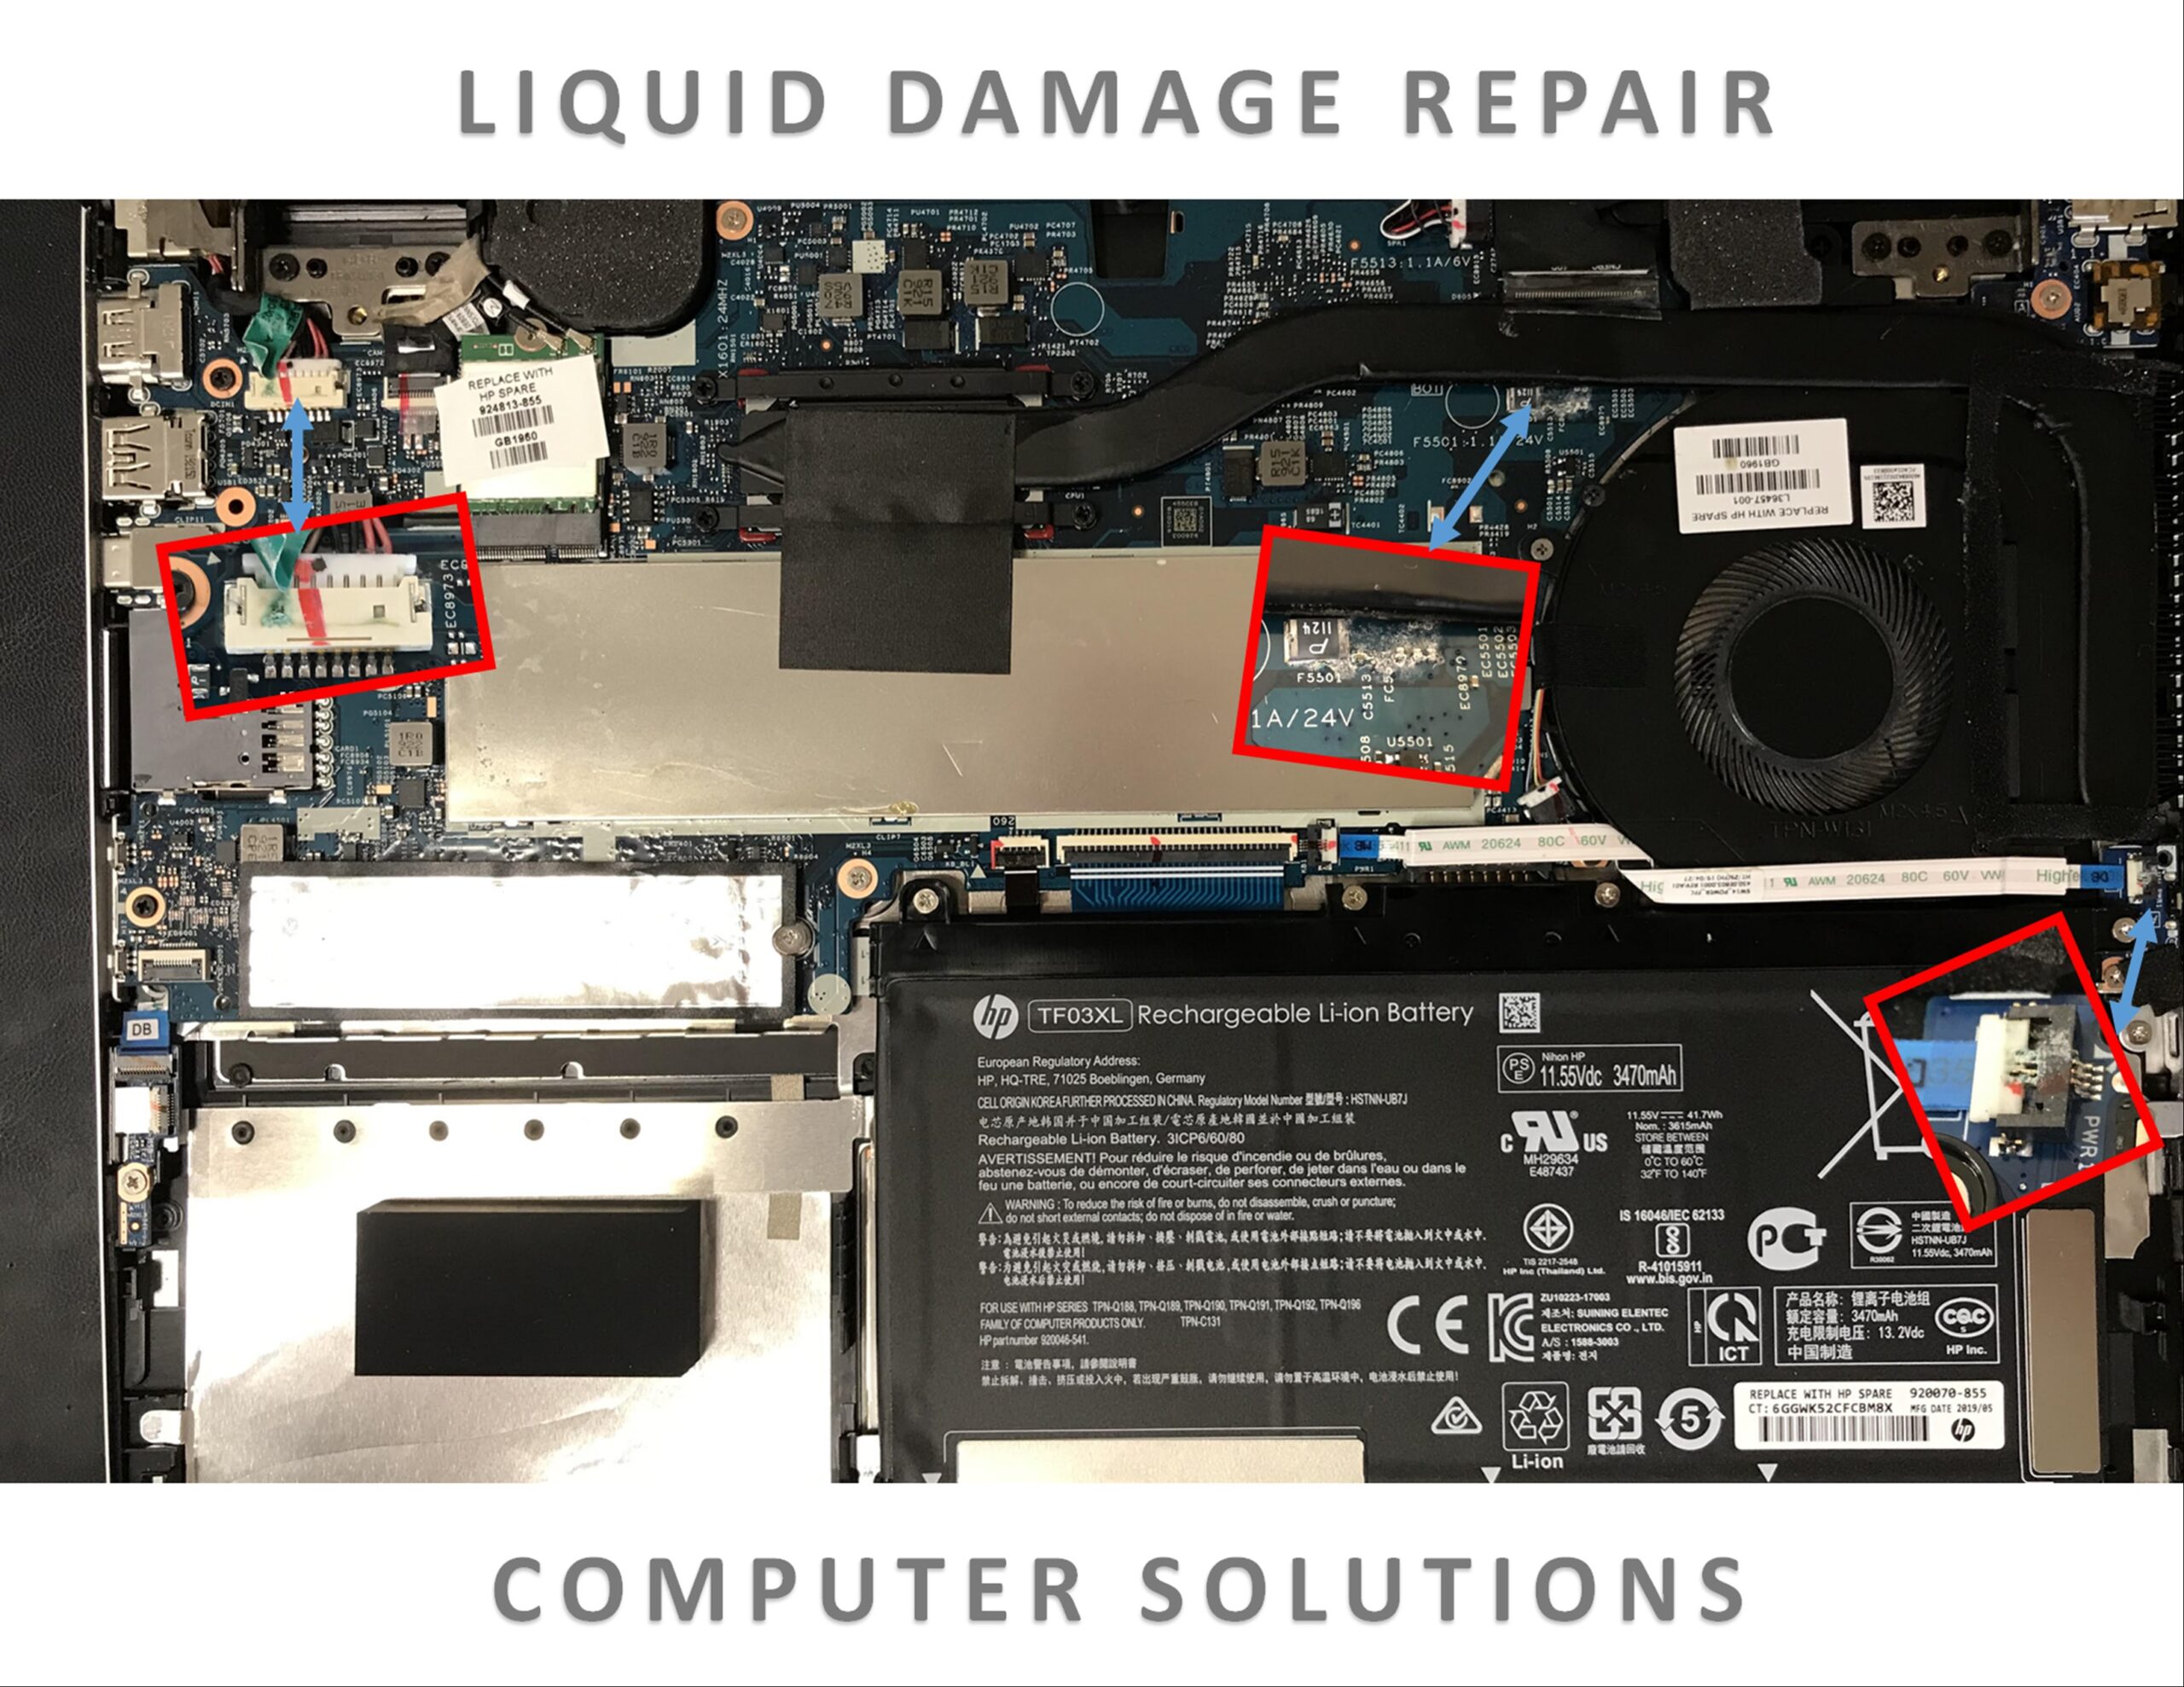 text - Liquid Spill Damage

image - red squares indicating damage